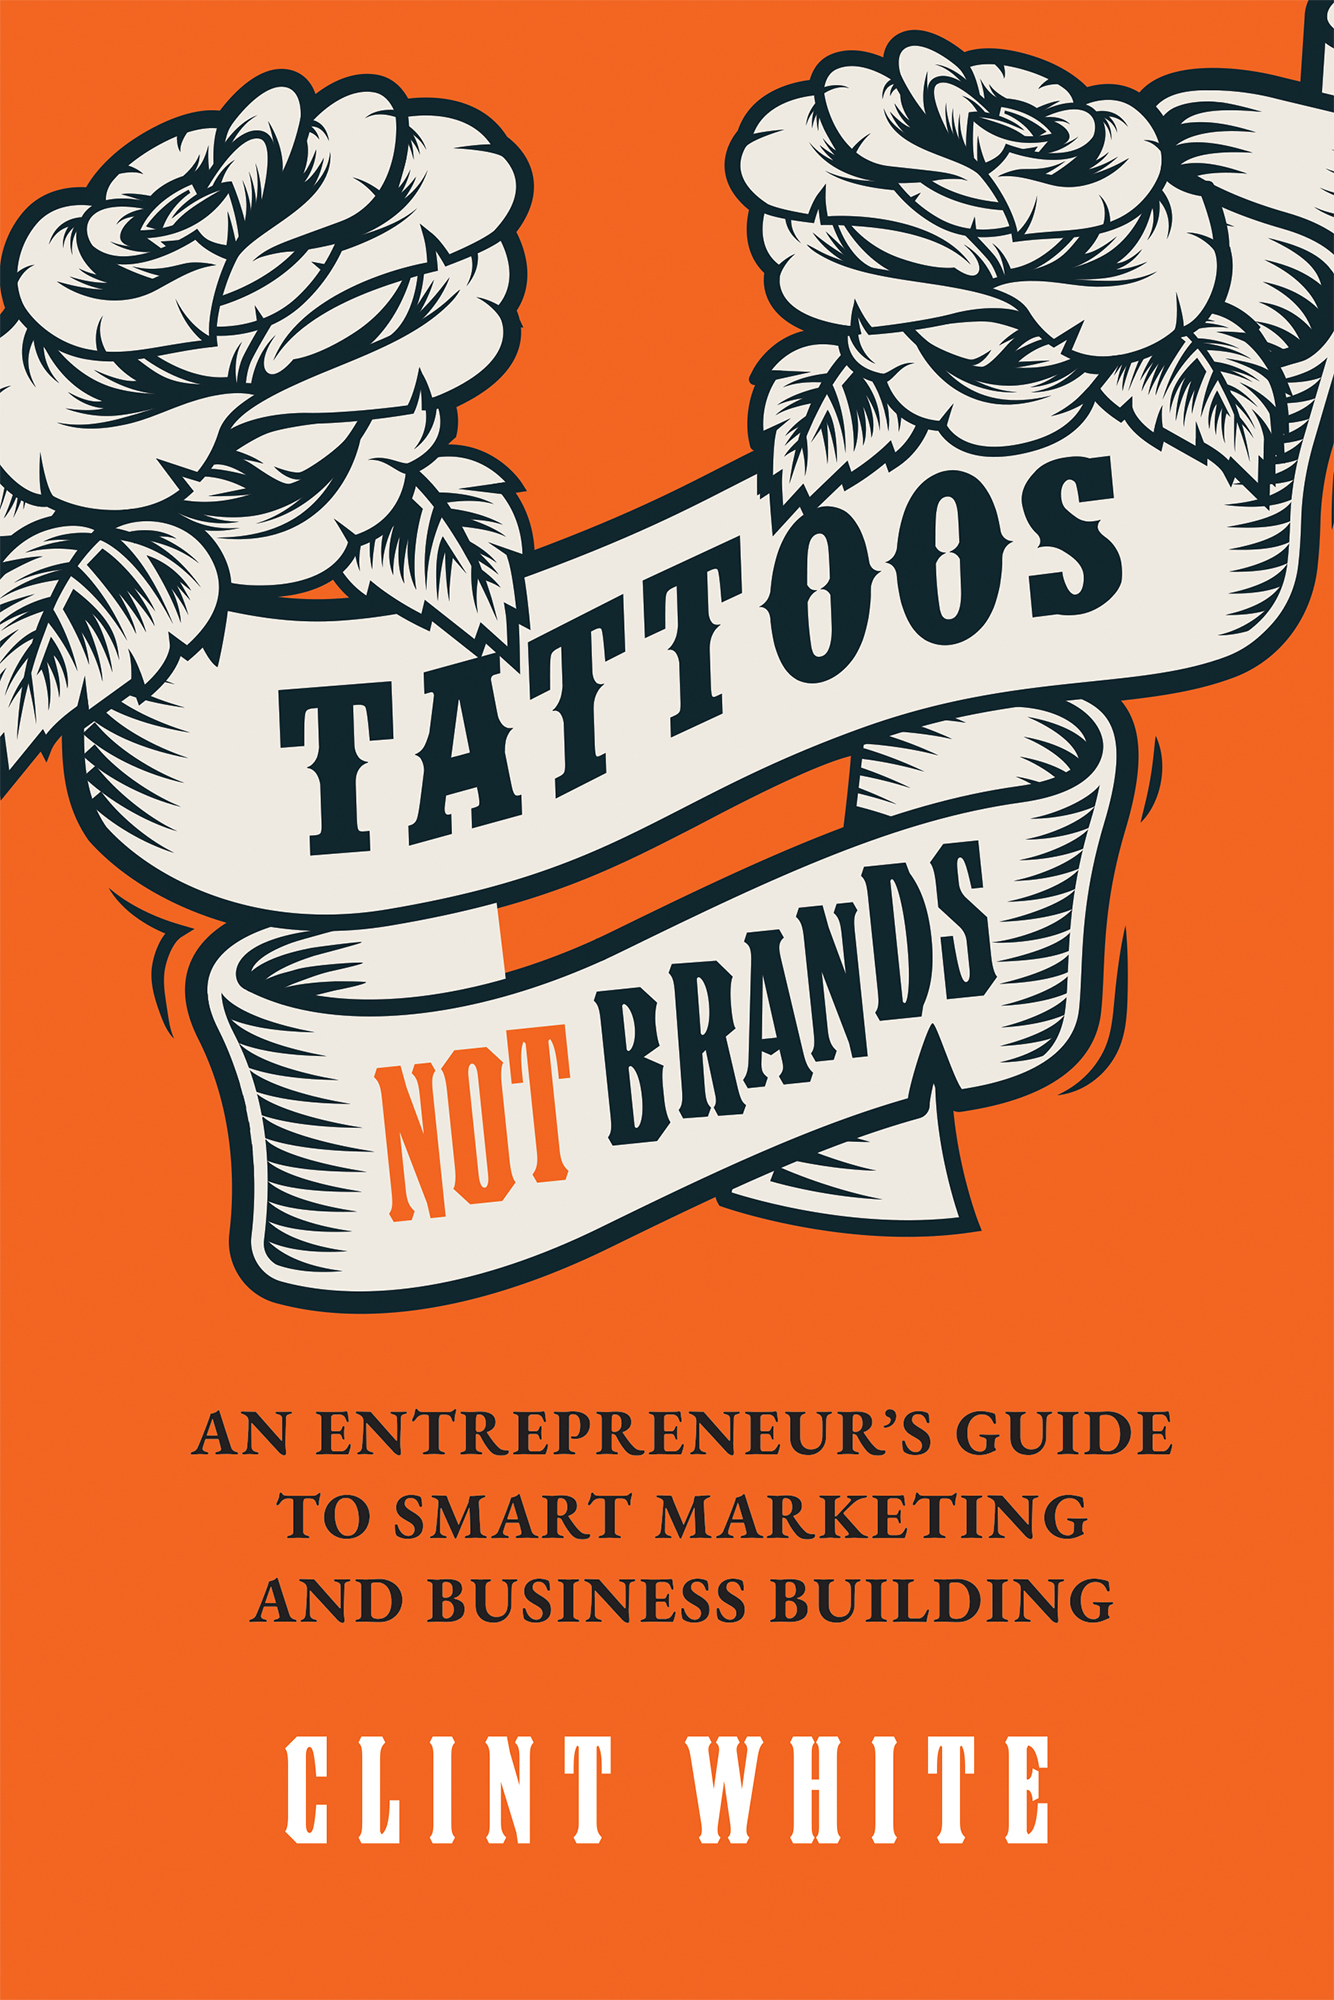 Praise for Tattoos Not Brands A must-read for anyone who is looking to grow - photo 1